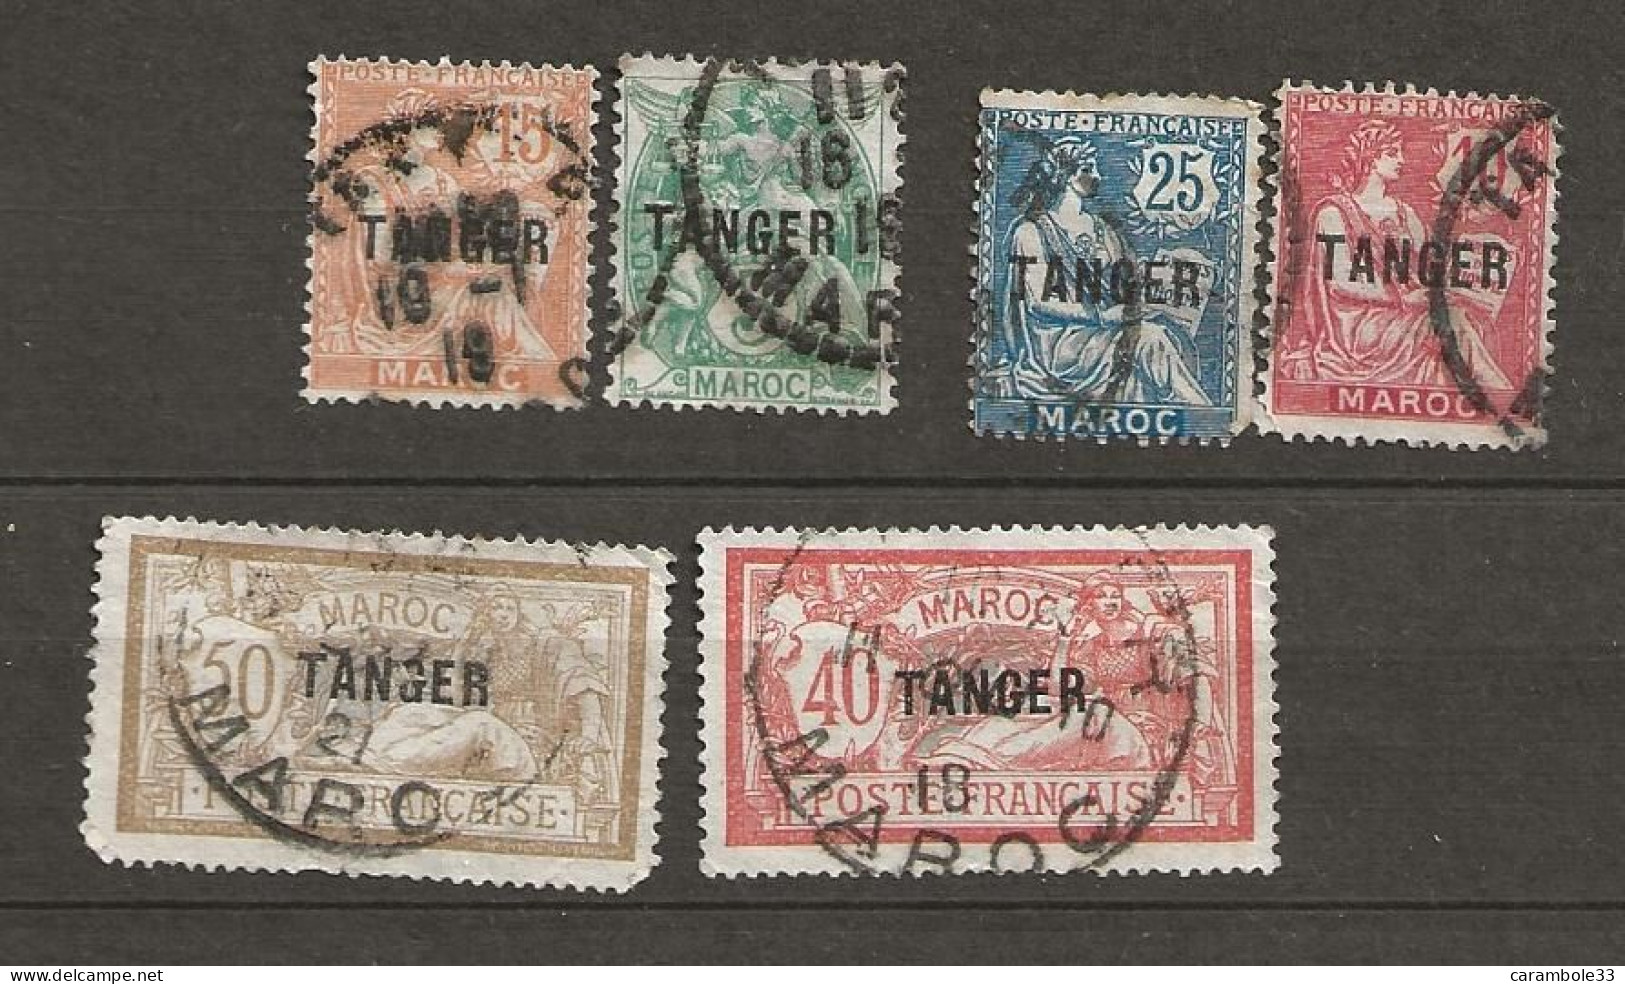 TIMBRE  MAROC  Surcharge TANGER  (1507) - Used Stamps